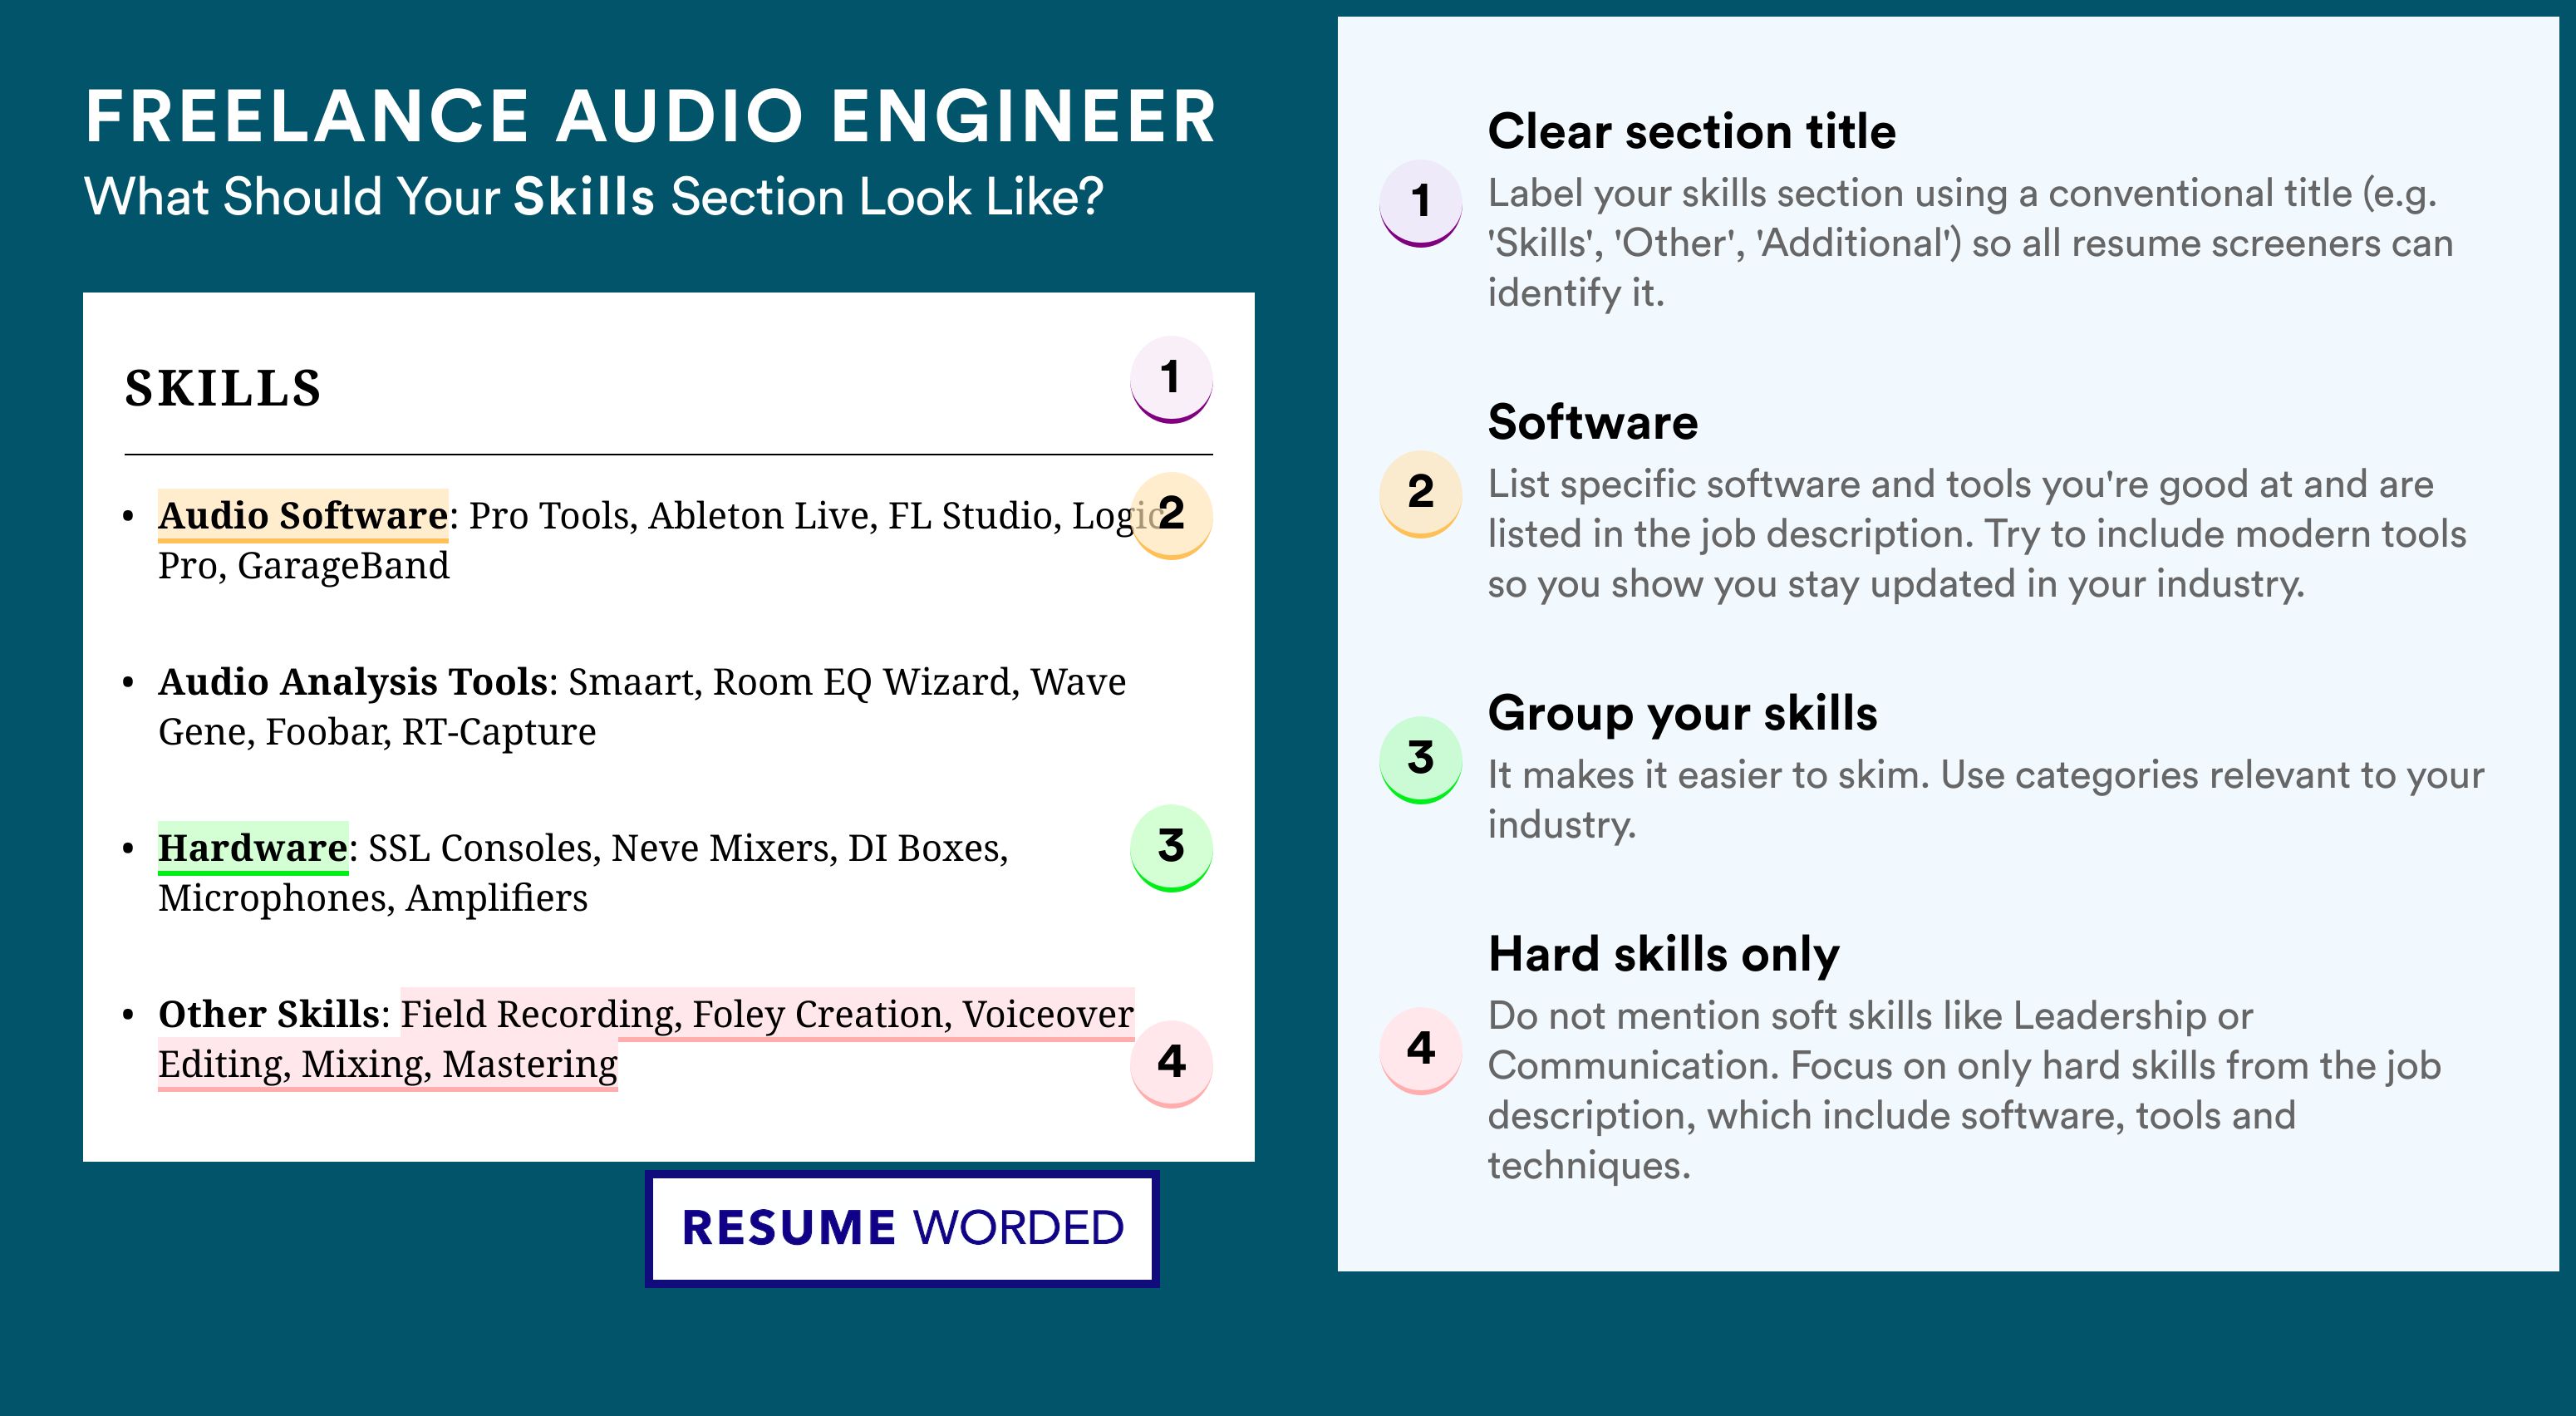 How To Write Your Skills Section - Freelance Audio Engineer Roles